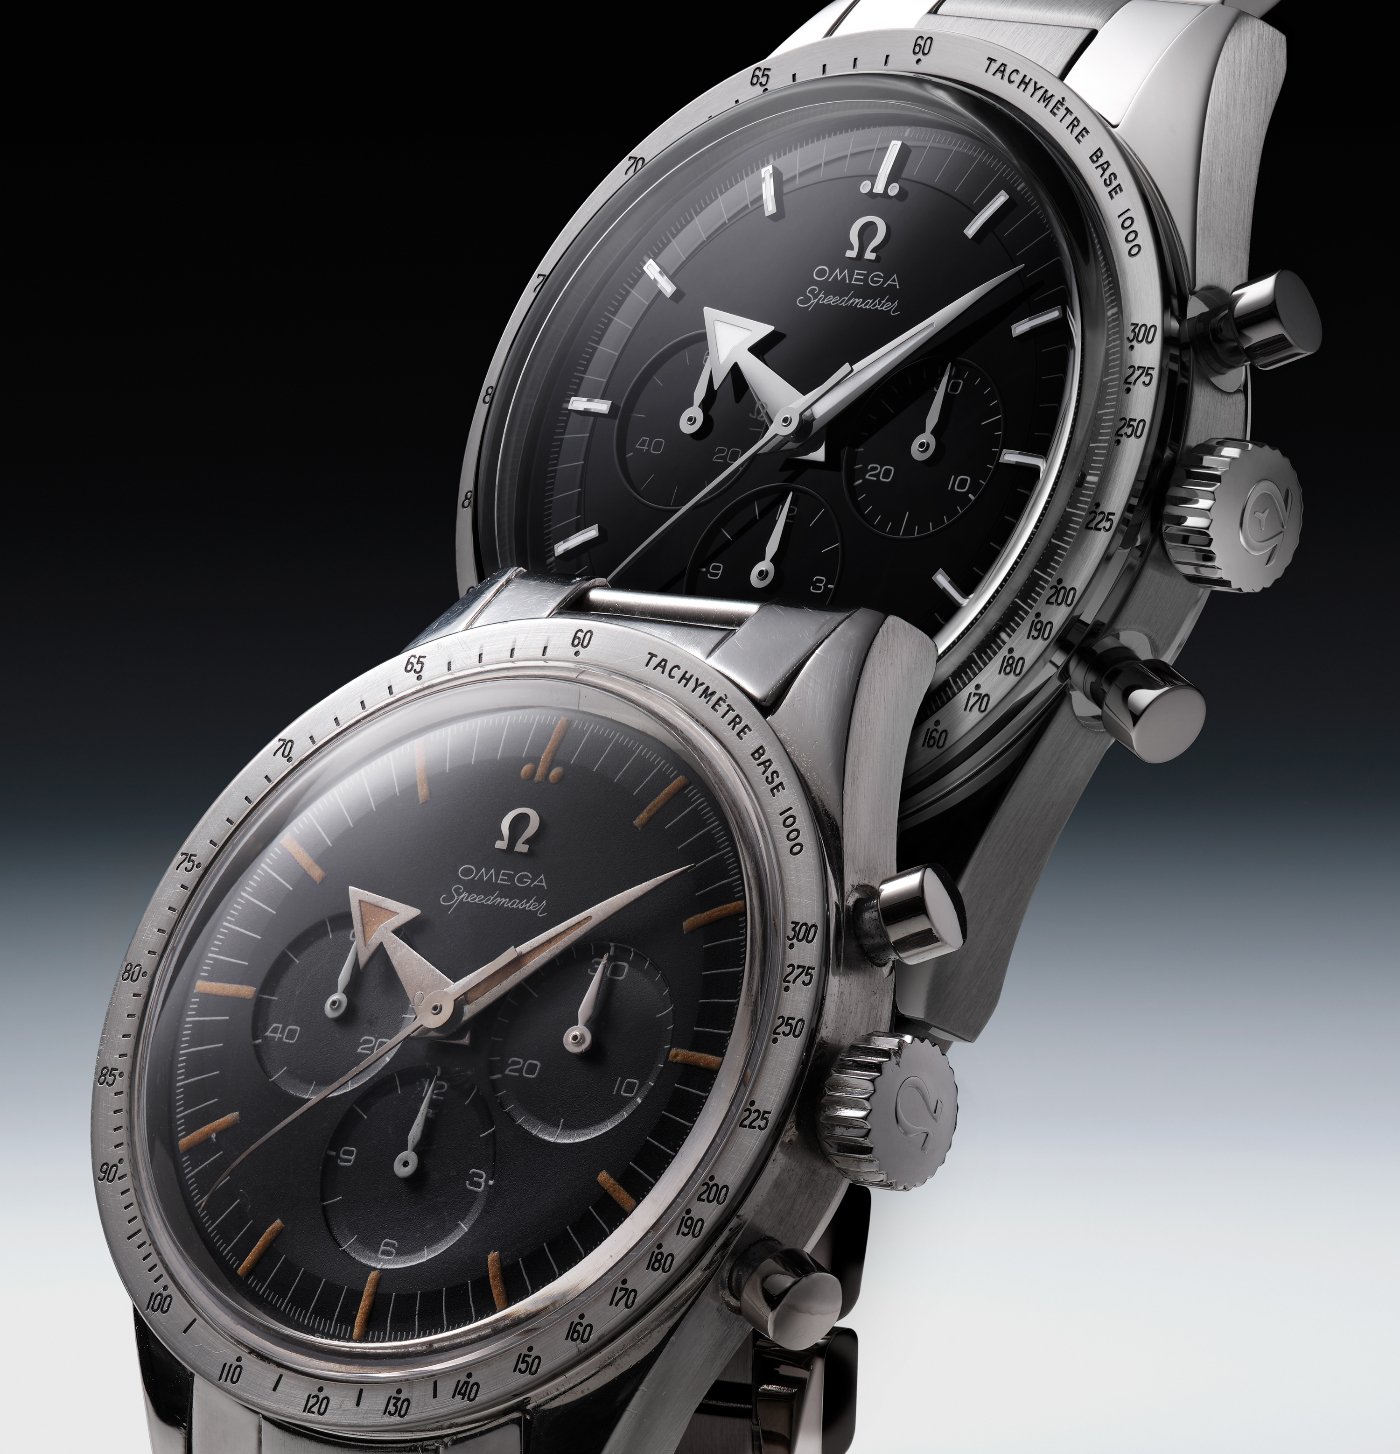 Omega begins 2022 with a new Speedmaster